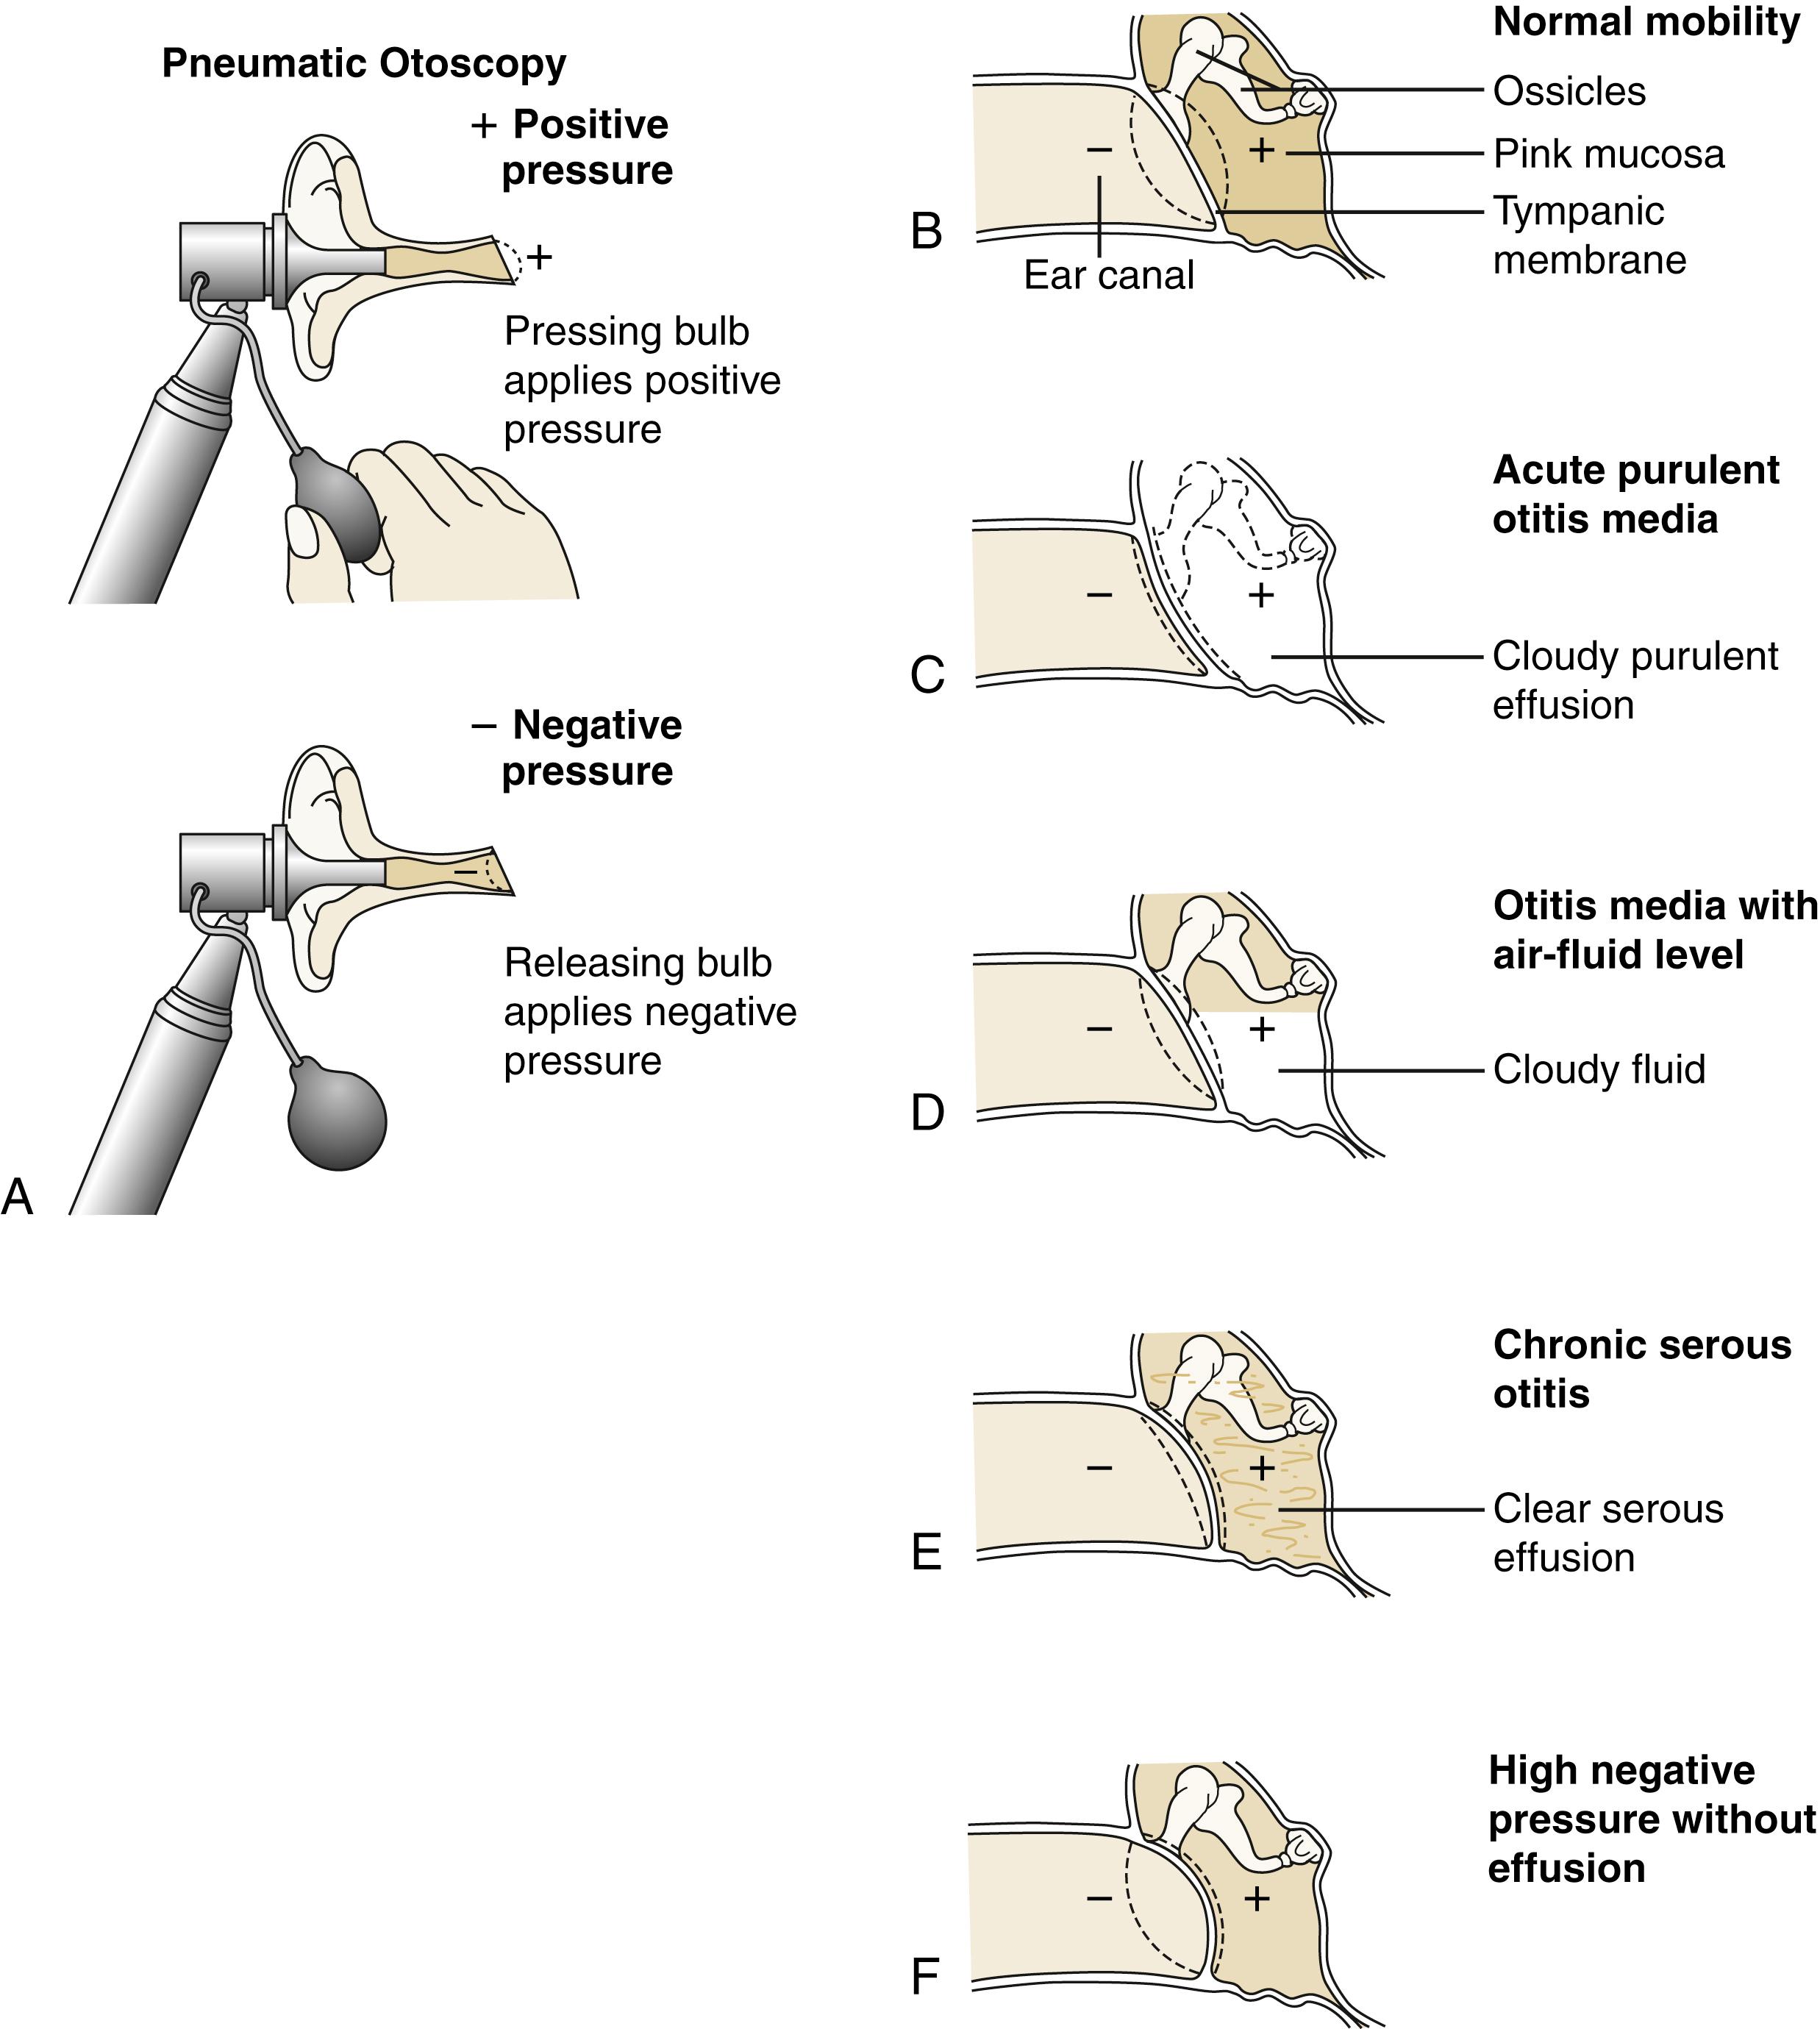 Fig. 24.23, Technique and findings in pneumatic otoscopy. (A) The speculum is inserted into the ear canal to form a tight seal. The bulb is then gently and slowly pressed and released while the mobility of the drum is assessed. Pressing on the bulb applies positive pressure; letting up applies negative pressure. (B) A normal drum moves inward and then back. (C) In cases of acute otitis media, in which the middle ear is filled with purulent material, the drum bulges toward the examiner and moves minimally. (D) In cases of acute otitis media with an air/fluid level, mobility may be nearly normal. In some patients, however, the drum may be retracted, indicating increased negative pressure. If this is the case, mobility on positive pressure may be reduced, whereas movement on negative pressure is nearly normal or only mildly decreased. (E) This is the same pattern as that seen commonly in children with chronic serous otitis. (F) In cases of high negative pressure and no effusion, application of positive pressure produces little or no movement, but on negative pressure the drum billows back toward the examiner.